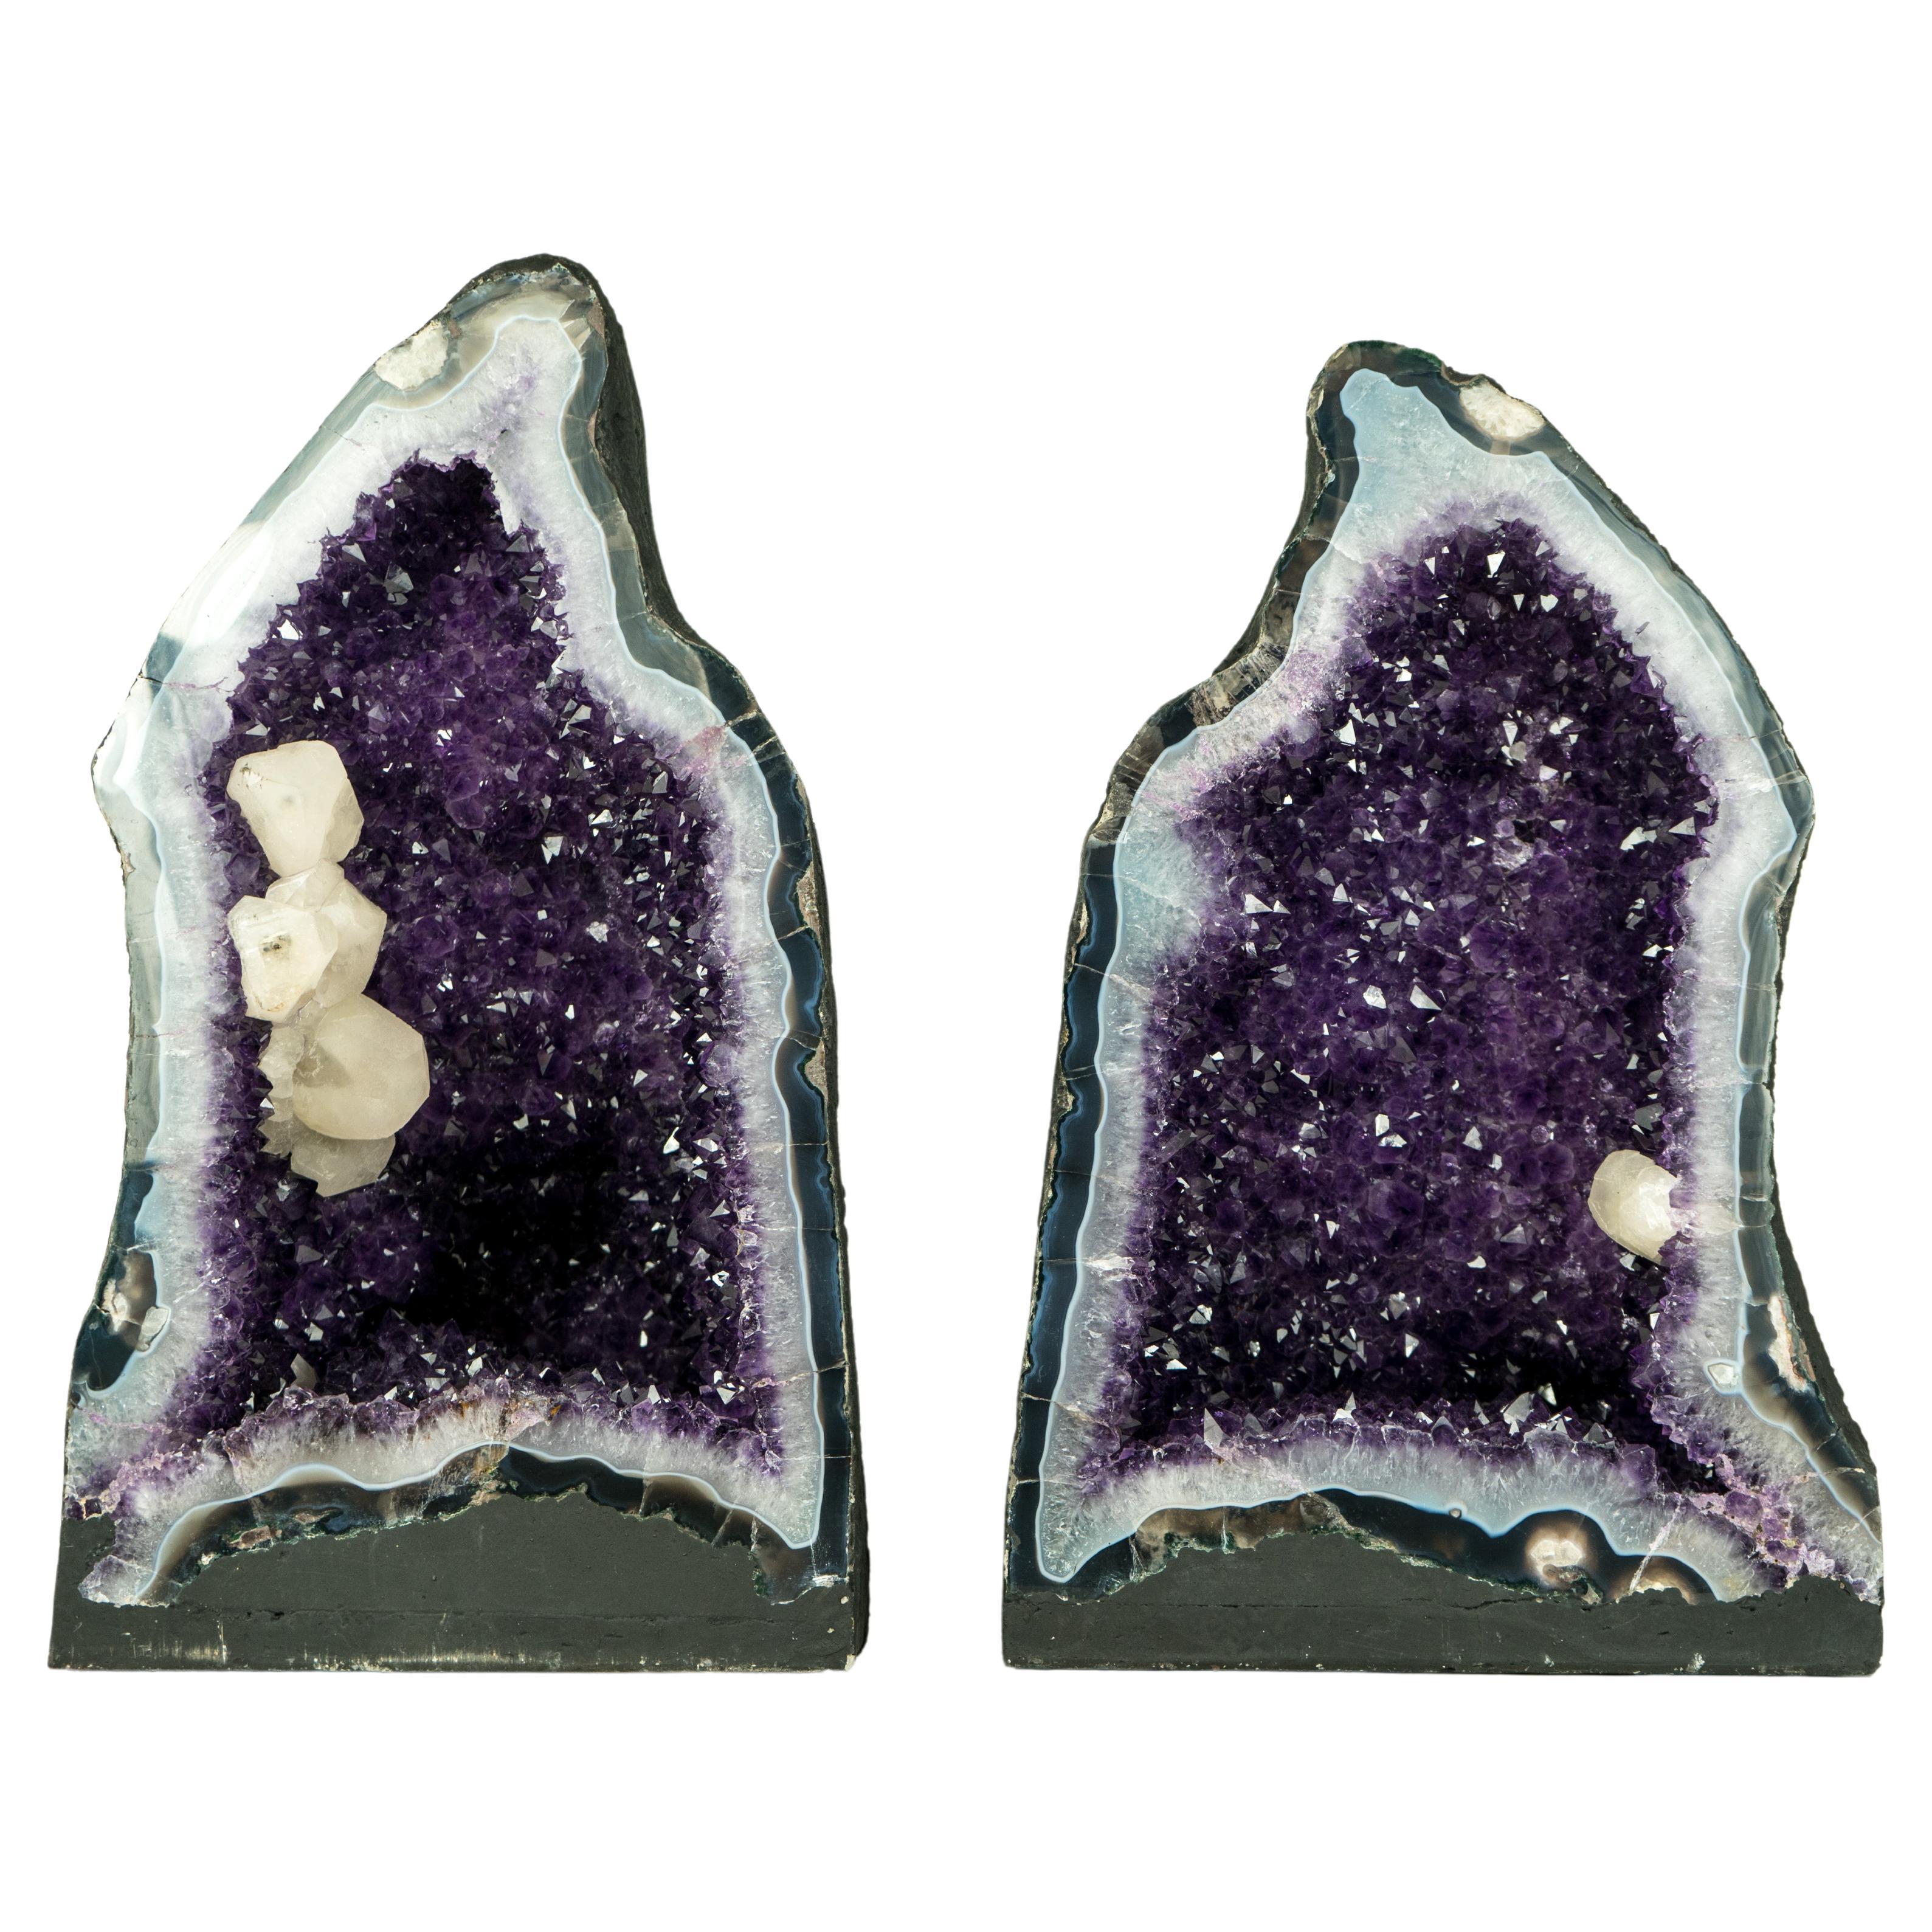 Pair of Amethyst Geodes with Purple Amethyst Druzy, Blue Lace Agate, Calcite For Sale